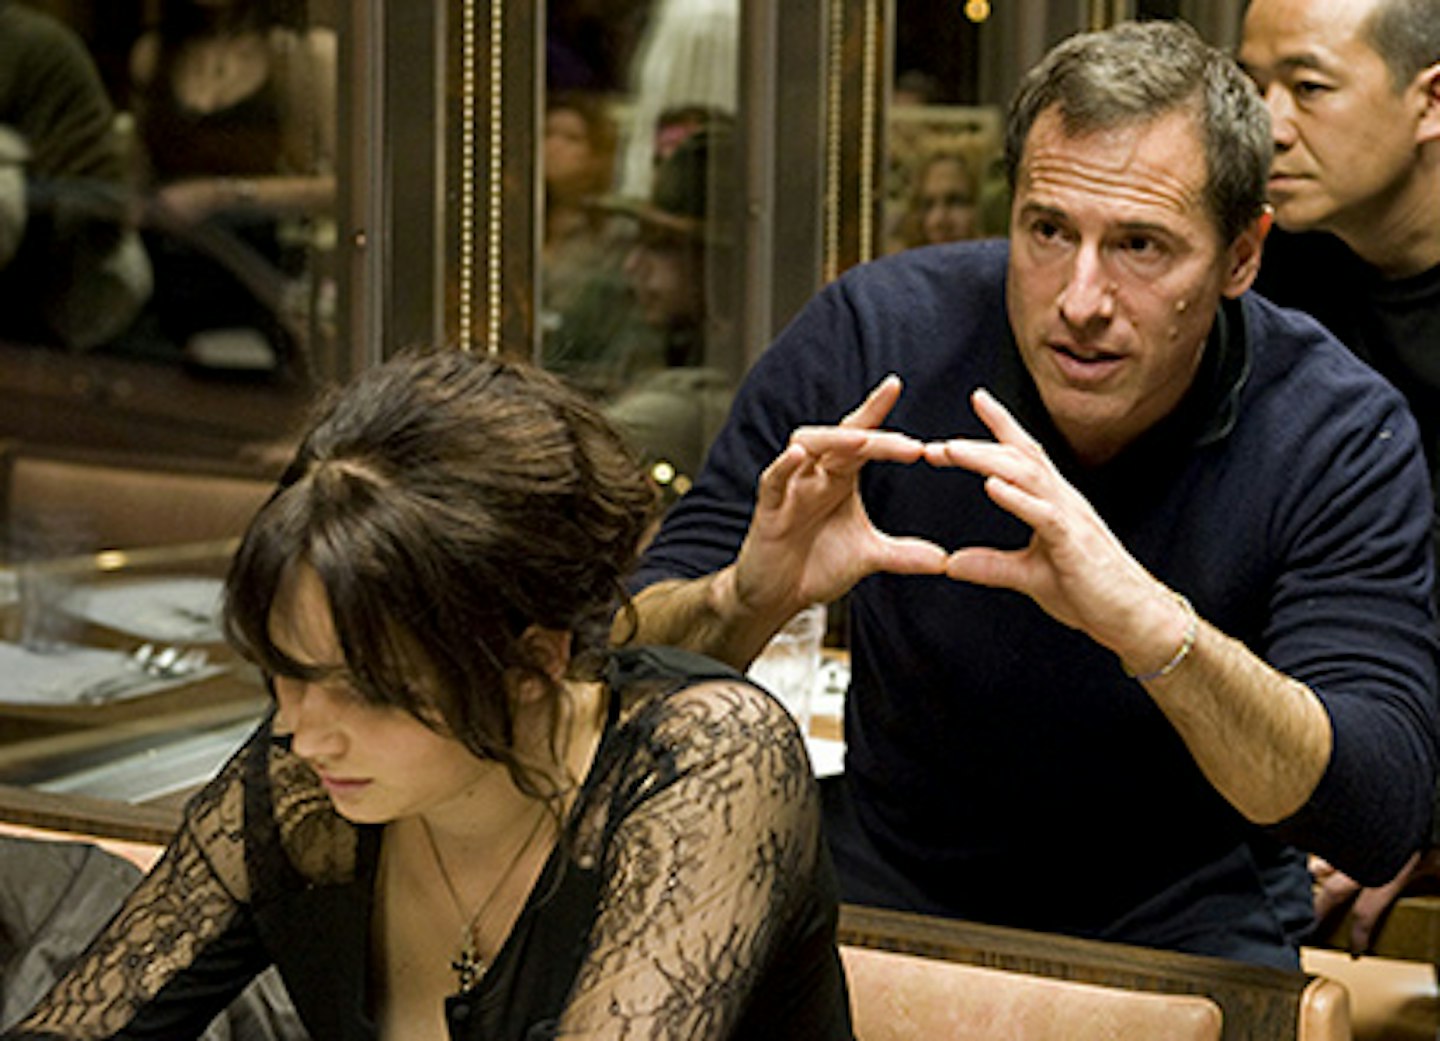 Silver Linings Playbook,' Directed by David O. Russell - The New York Times